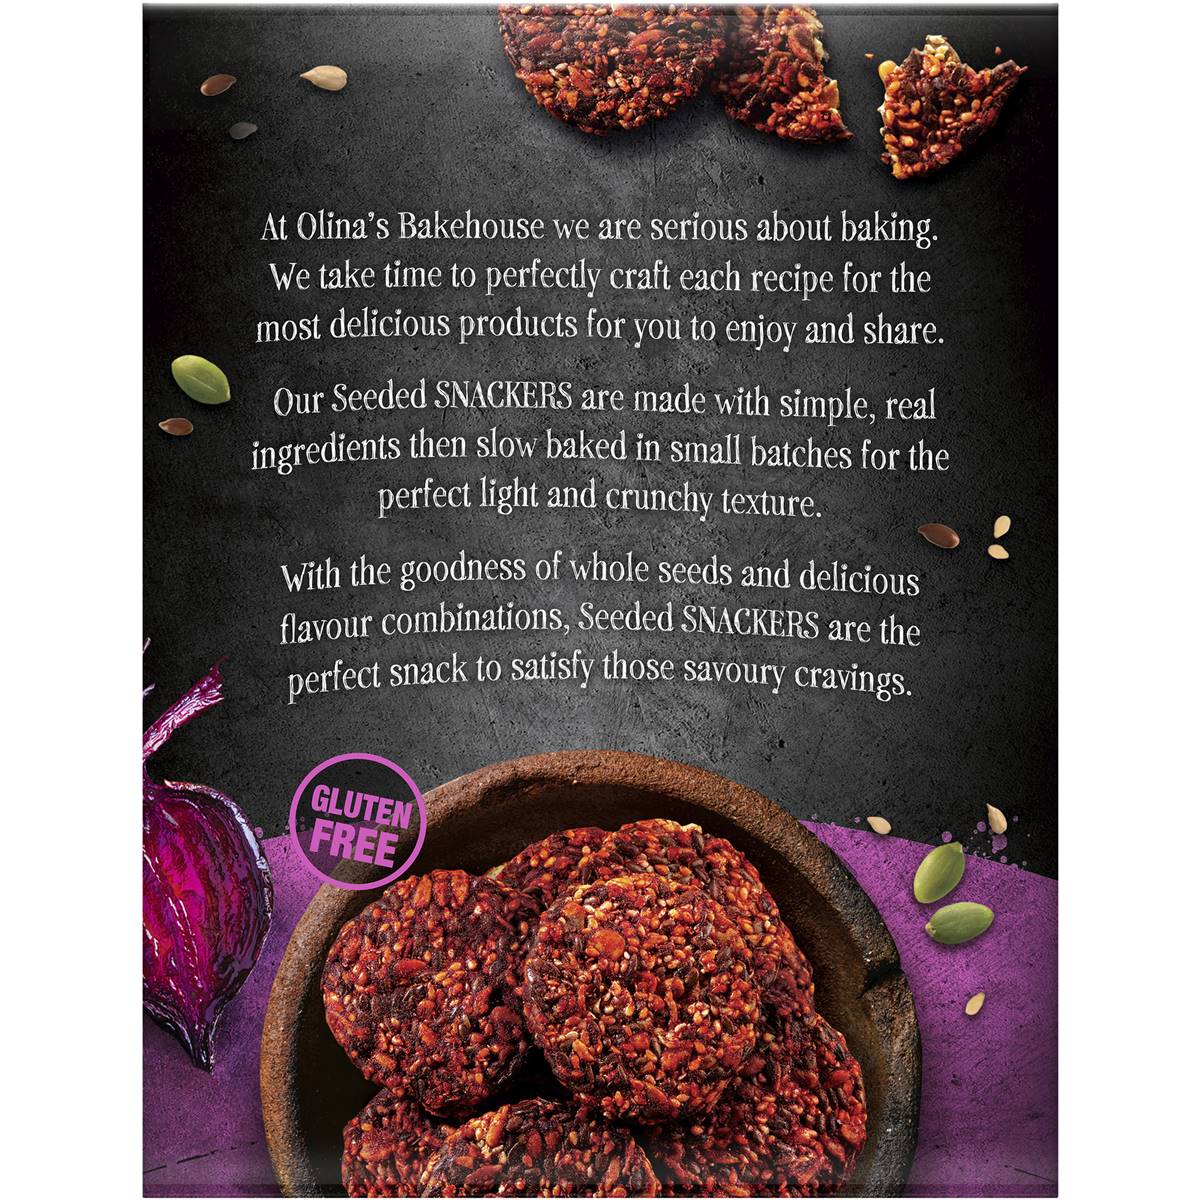 Olina's Seeded Snackers Roasted Beetroot 140g